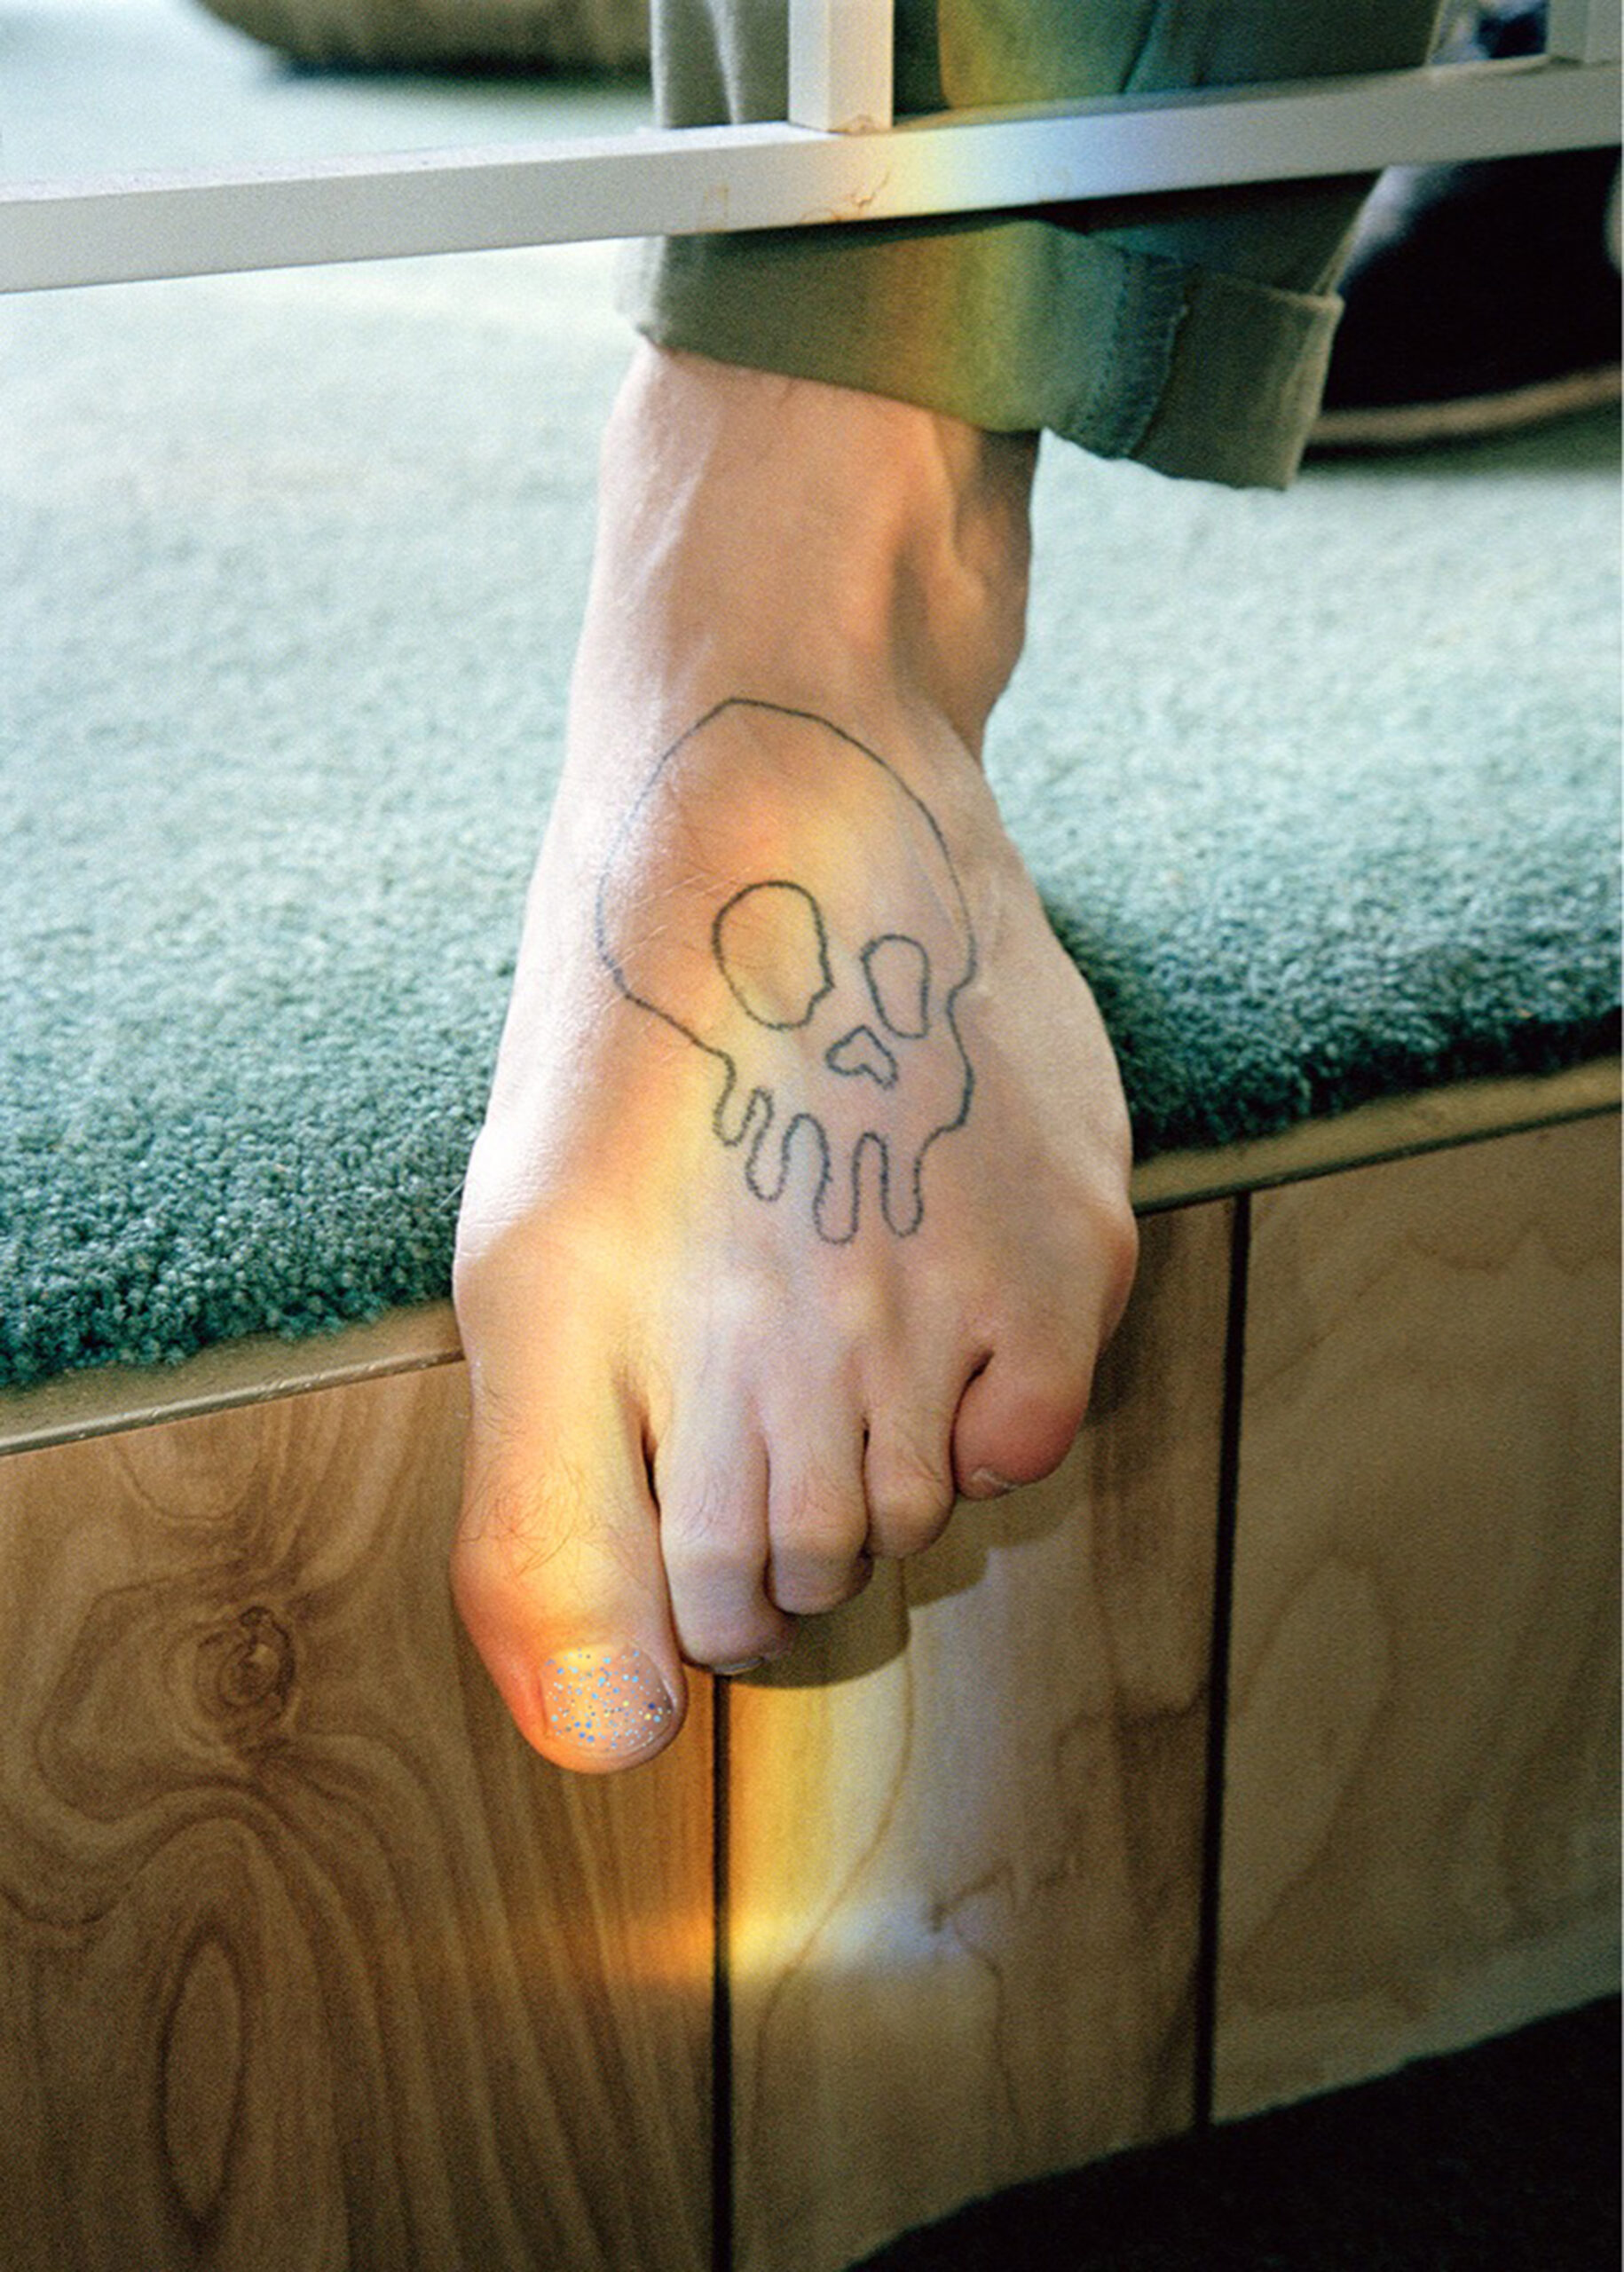 Image of a foot with a skull tattoo and glittery toenail polish.